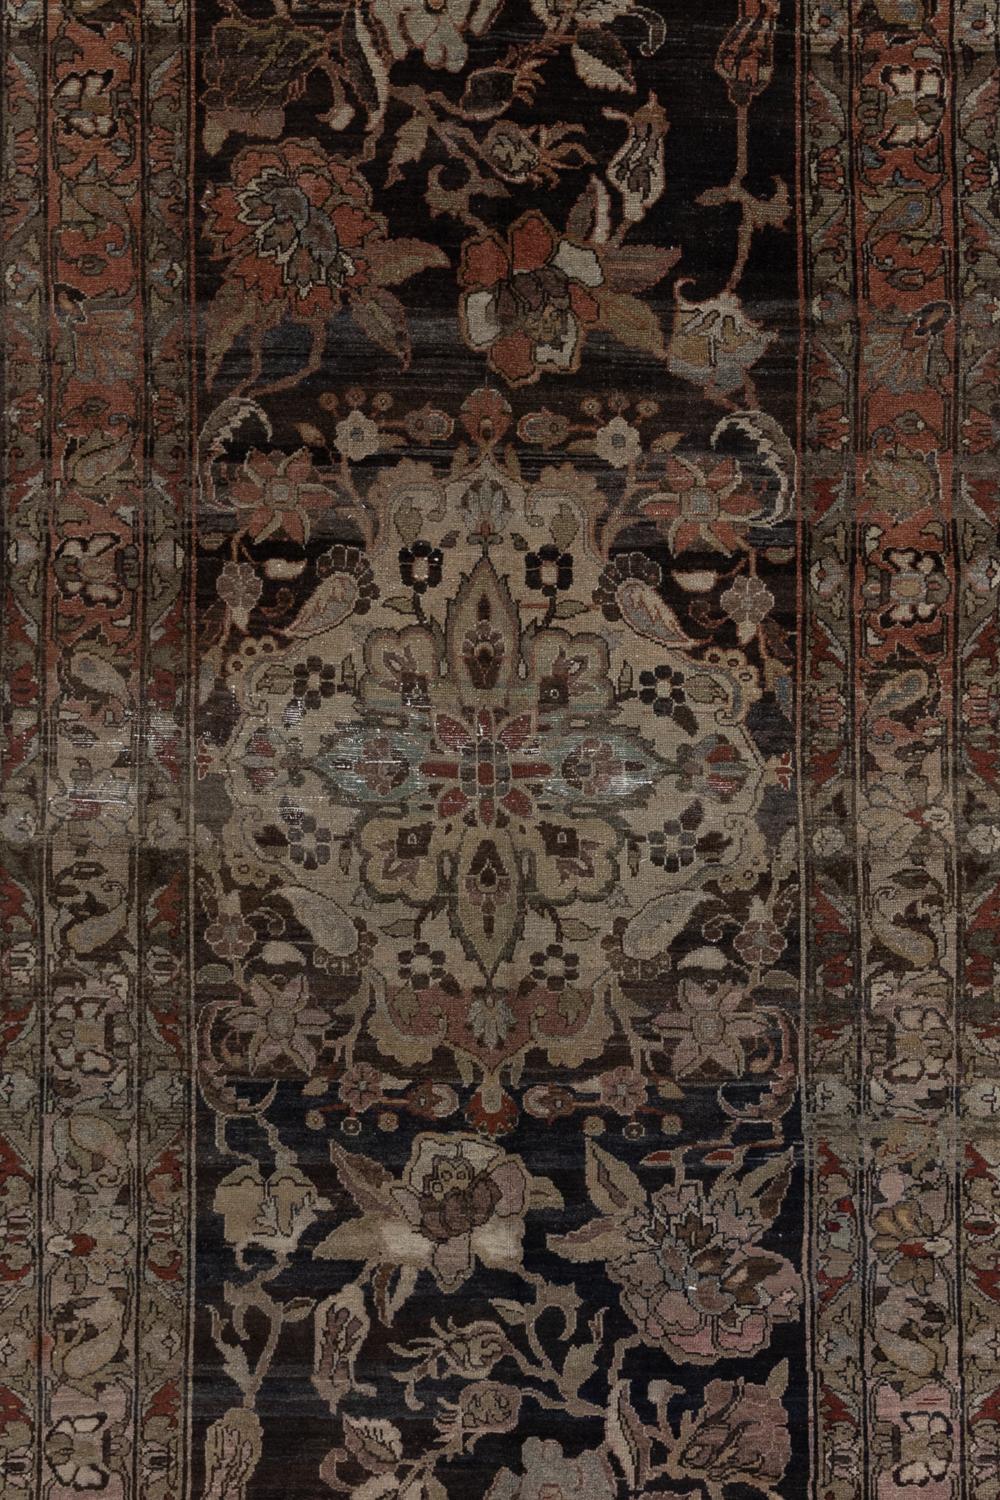 Age: first quarter of the 20th century

Pile: Low-medium 

Wear Notes: 3-4

Material: Wool on Cotton

Wear Guide:
Vintage and antique rugs are by nature, pre-loved and may show evidence of their past. There are varying degrees of wear to